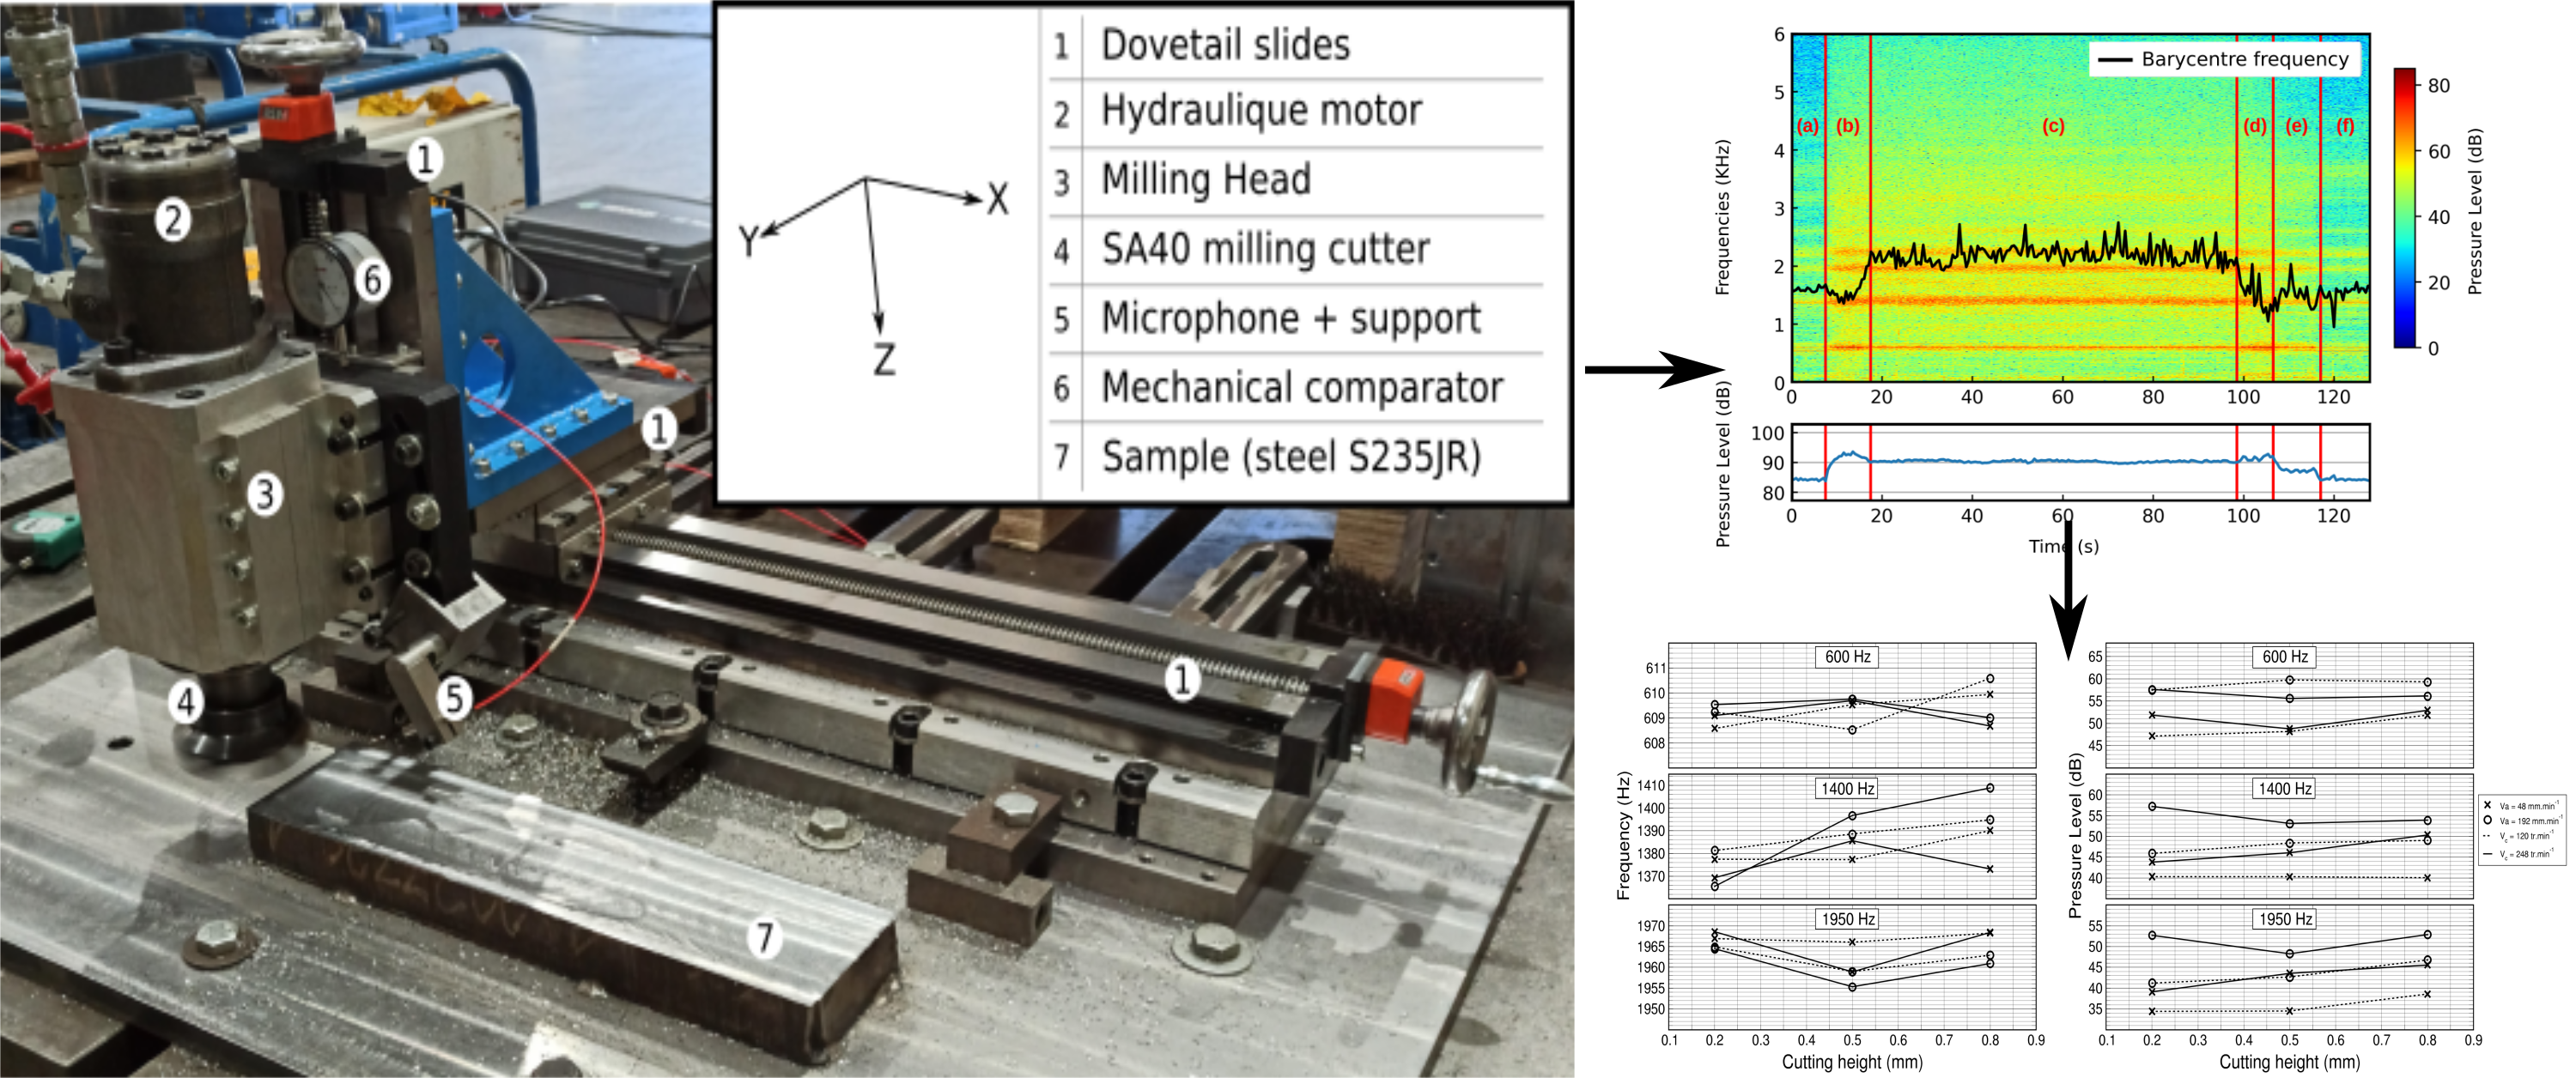 Acoustic characterization of an on-site machining operation